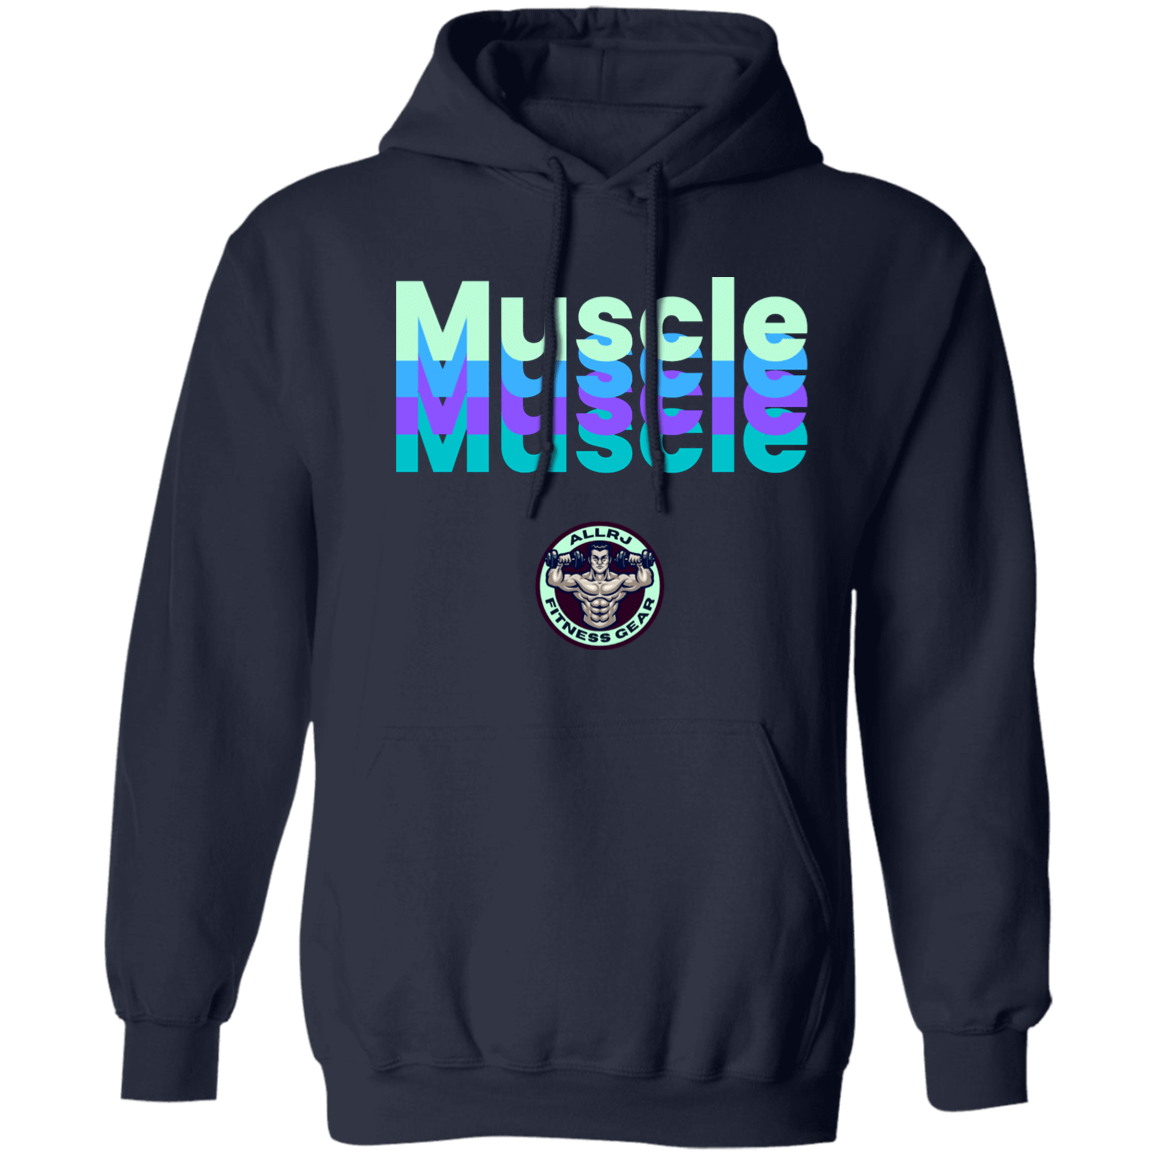 Allrj Muscle Pullover Hoodie Navy